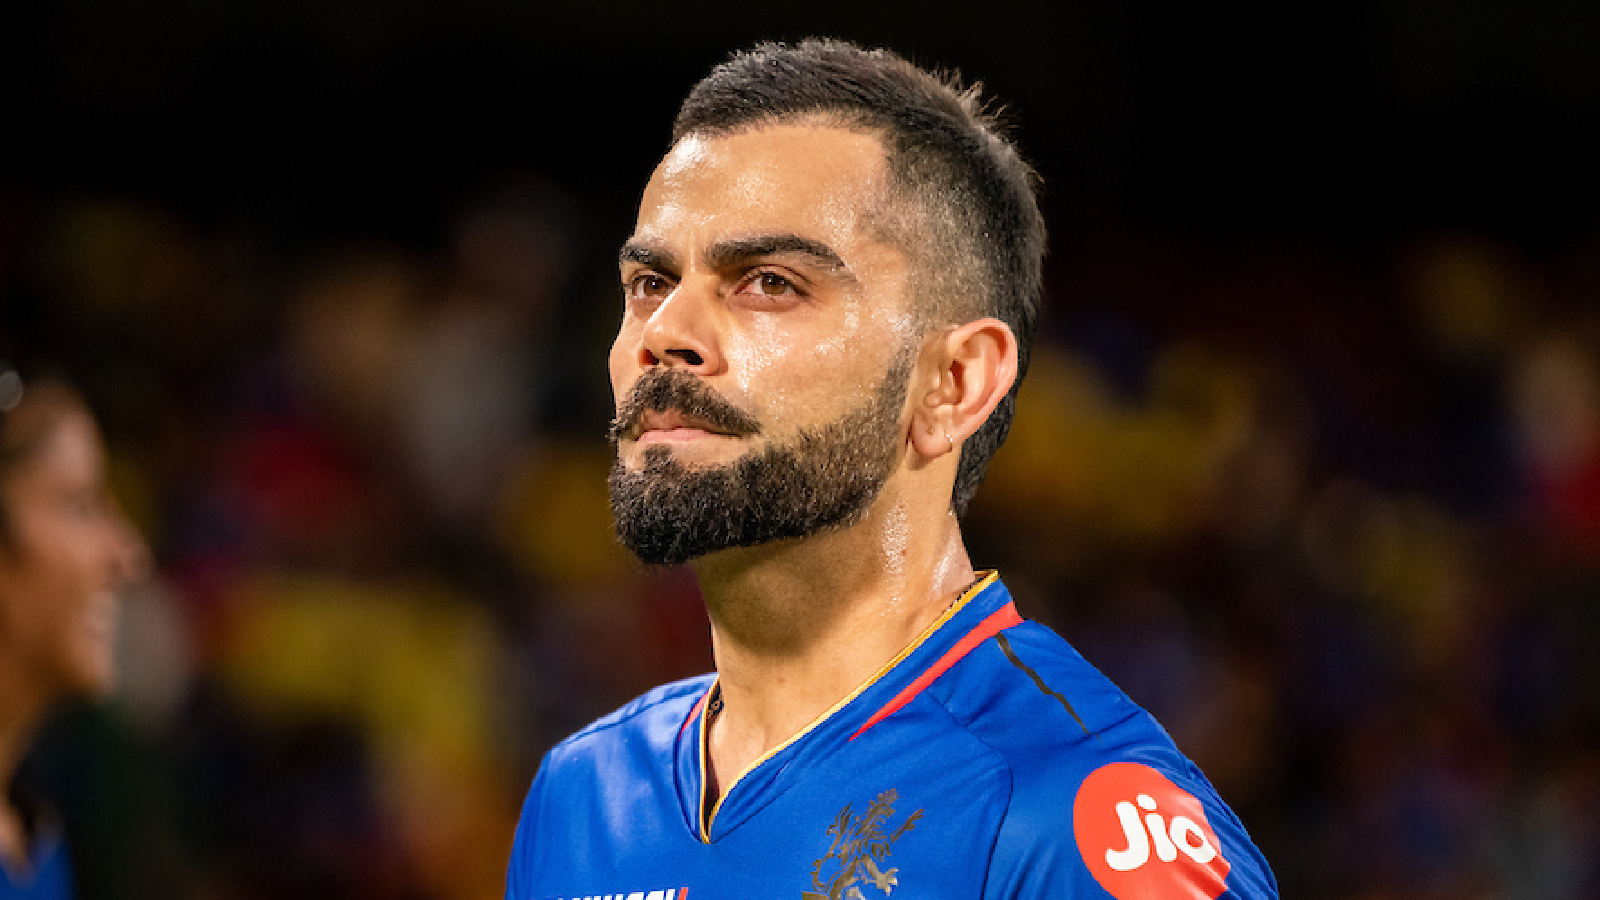 Virat Kohli may miss India’s only warm-up match in T20 World Cup due to post-IPL break: Reports